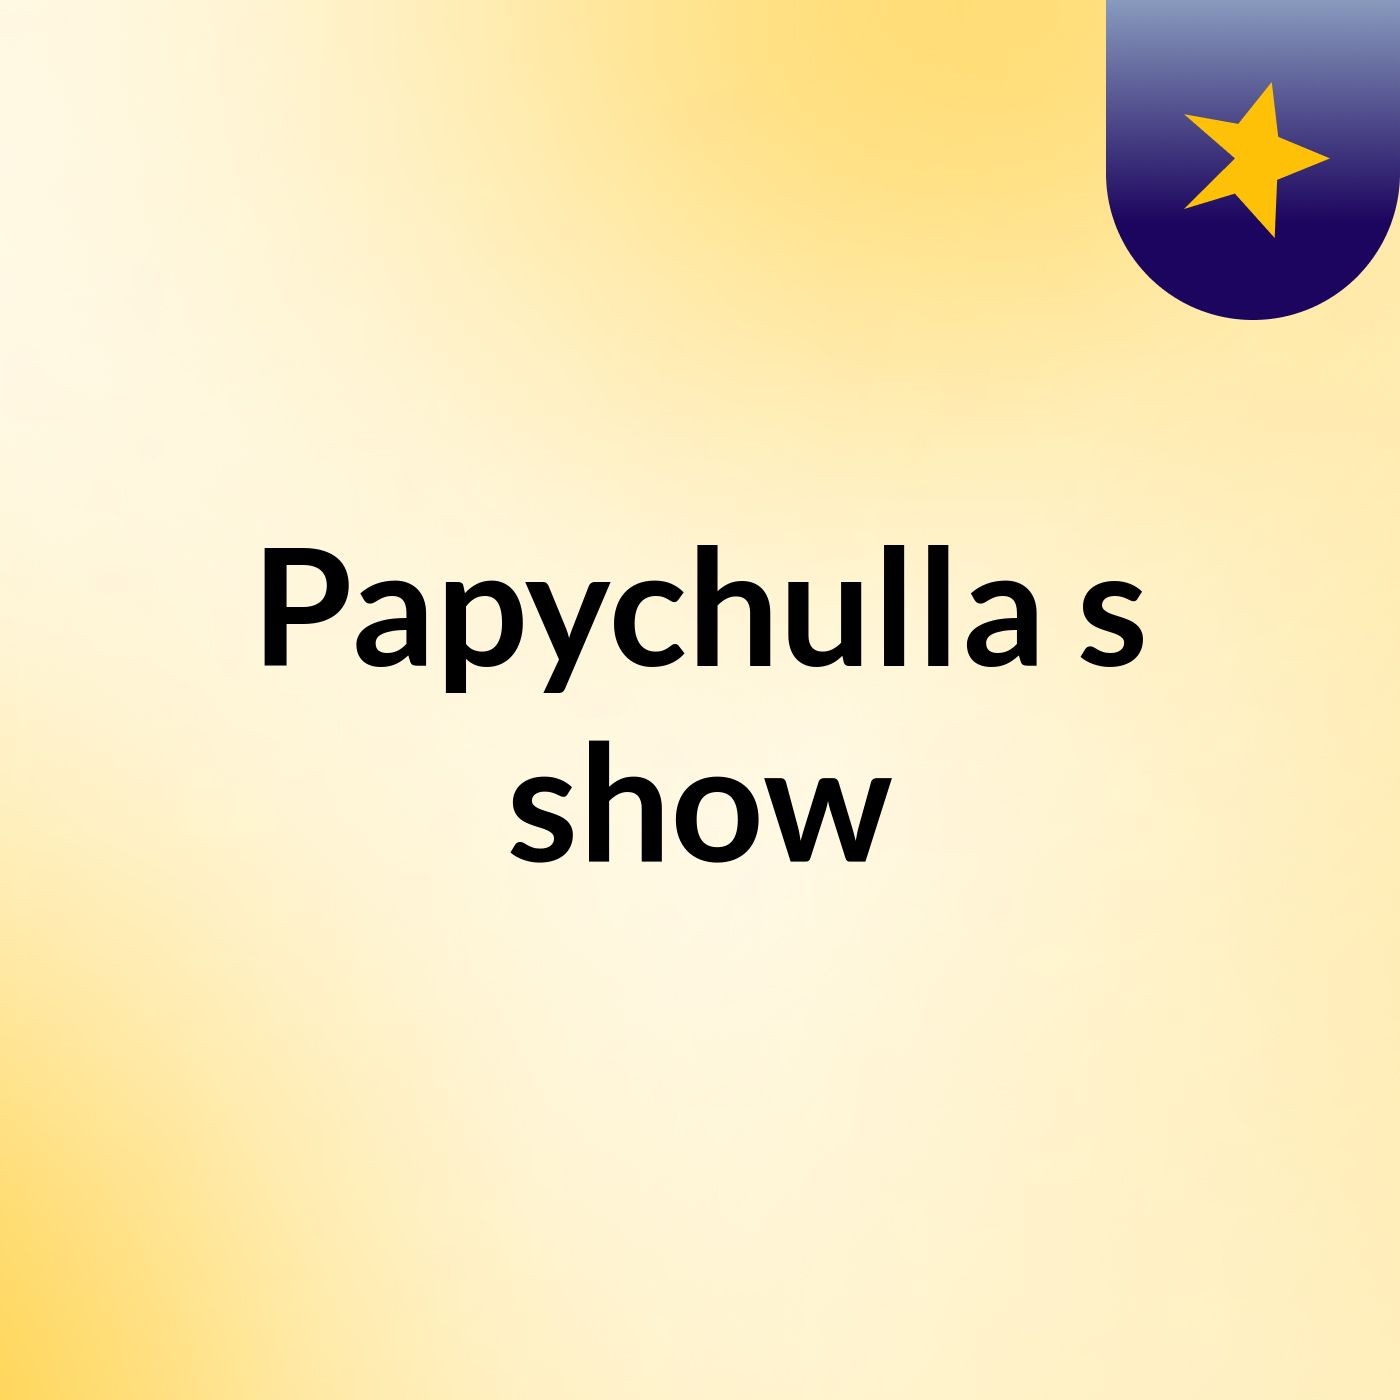 Papychulla's show